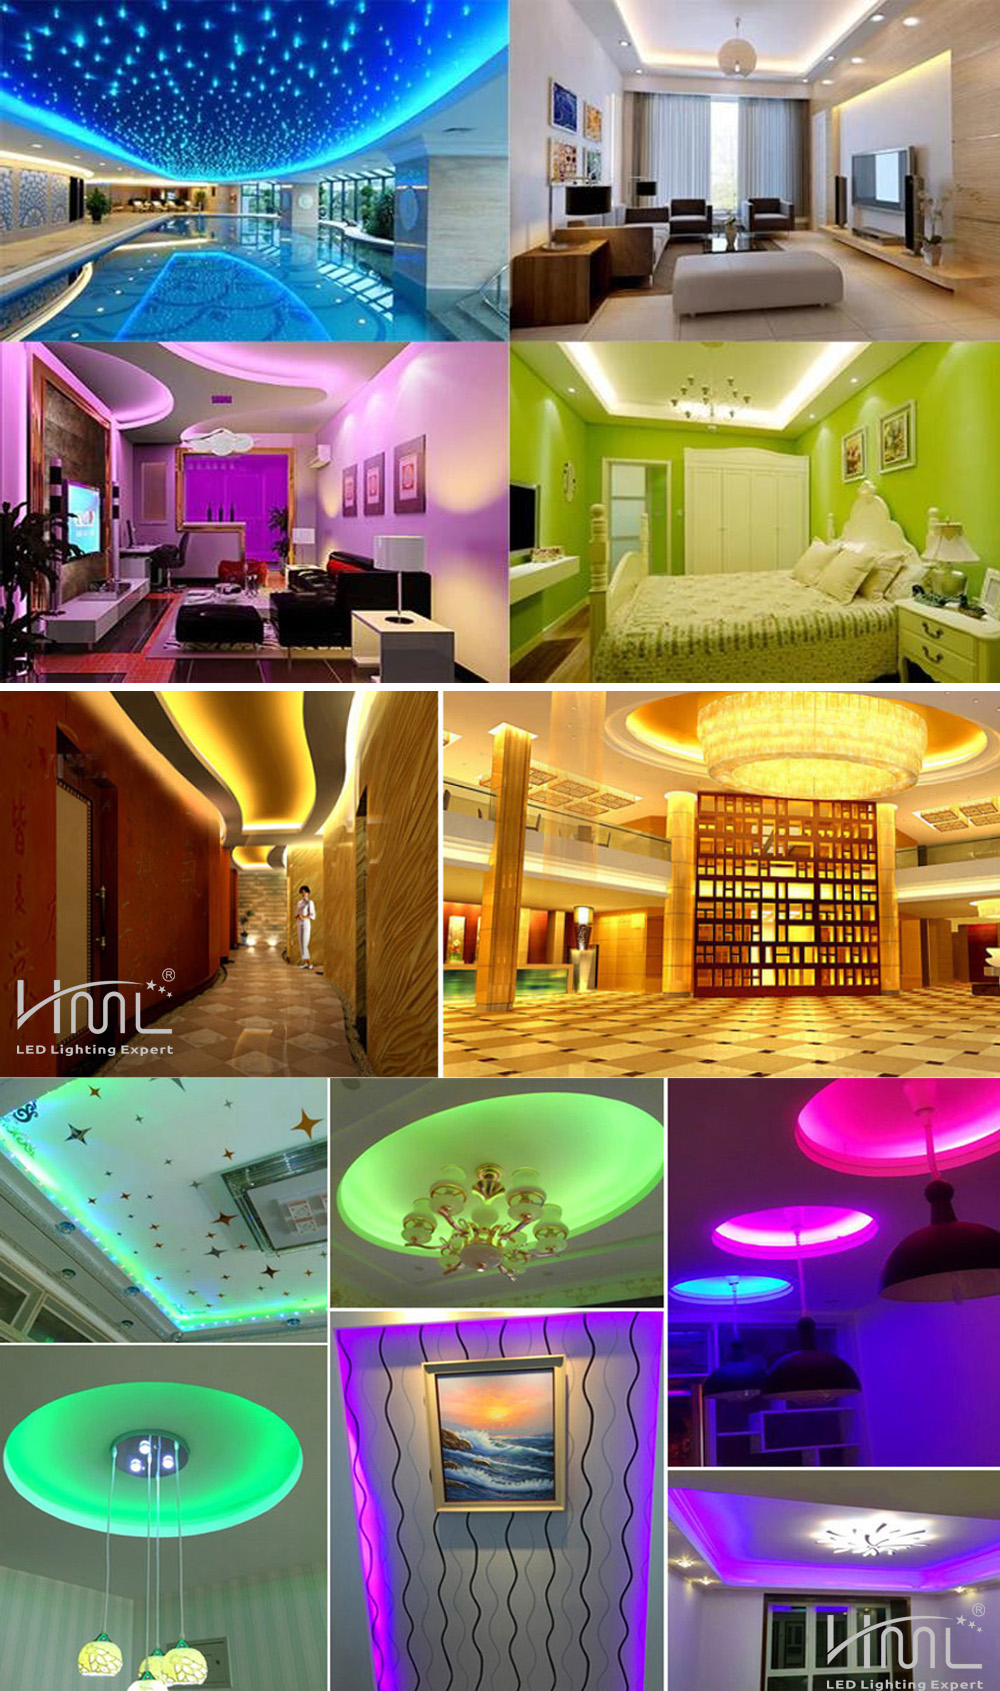 HML LED Strip Light 5M 24W RGB SMD2835 300 LEDs - RGB COLOR with IR 44 Keys Remote Control and US Adapter